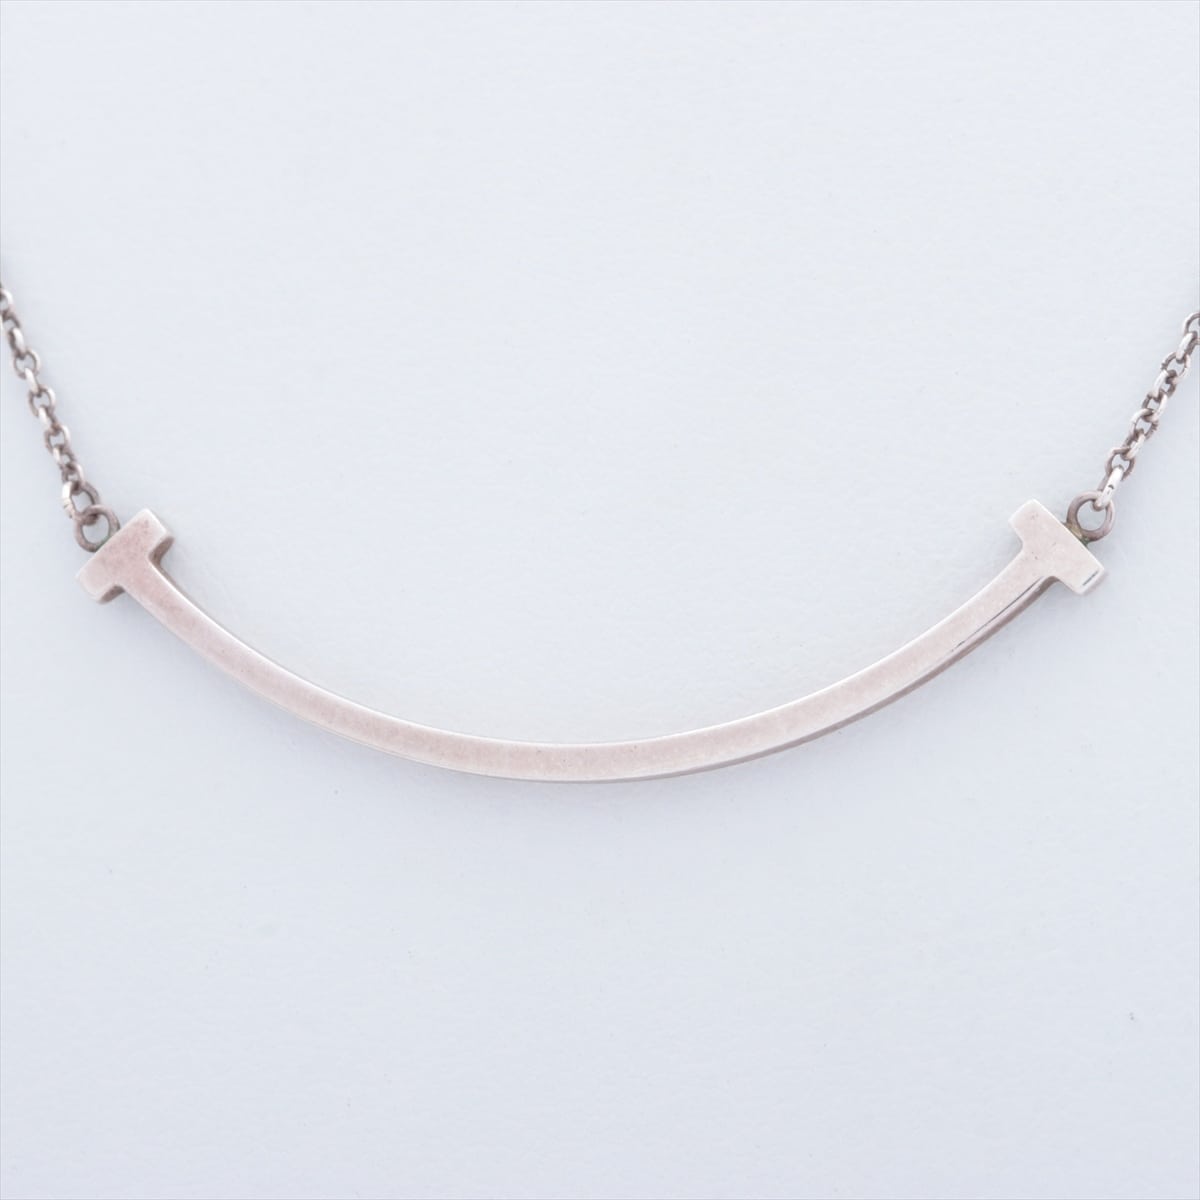 Tiffany T Smile Necklace 925 2.0g Silver